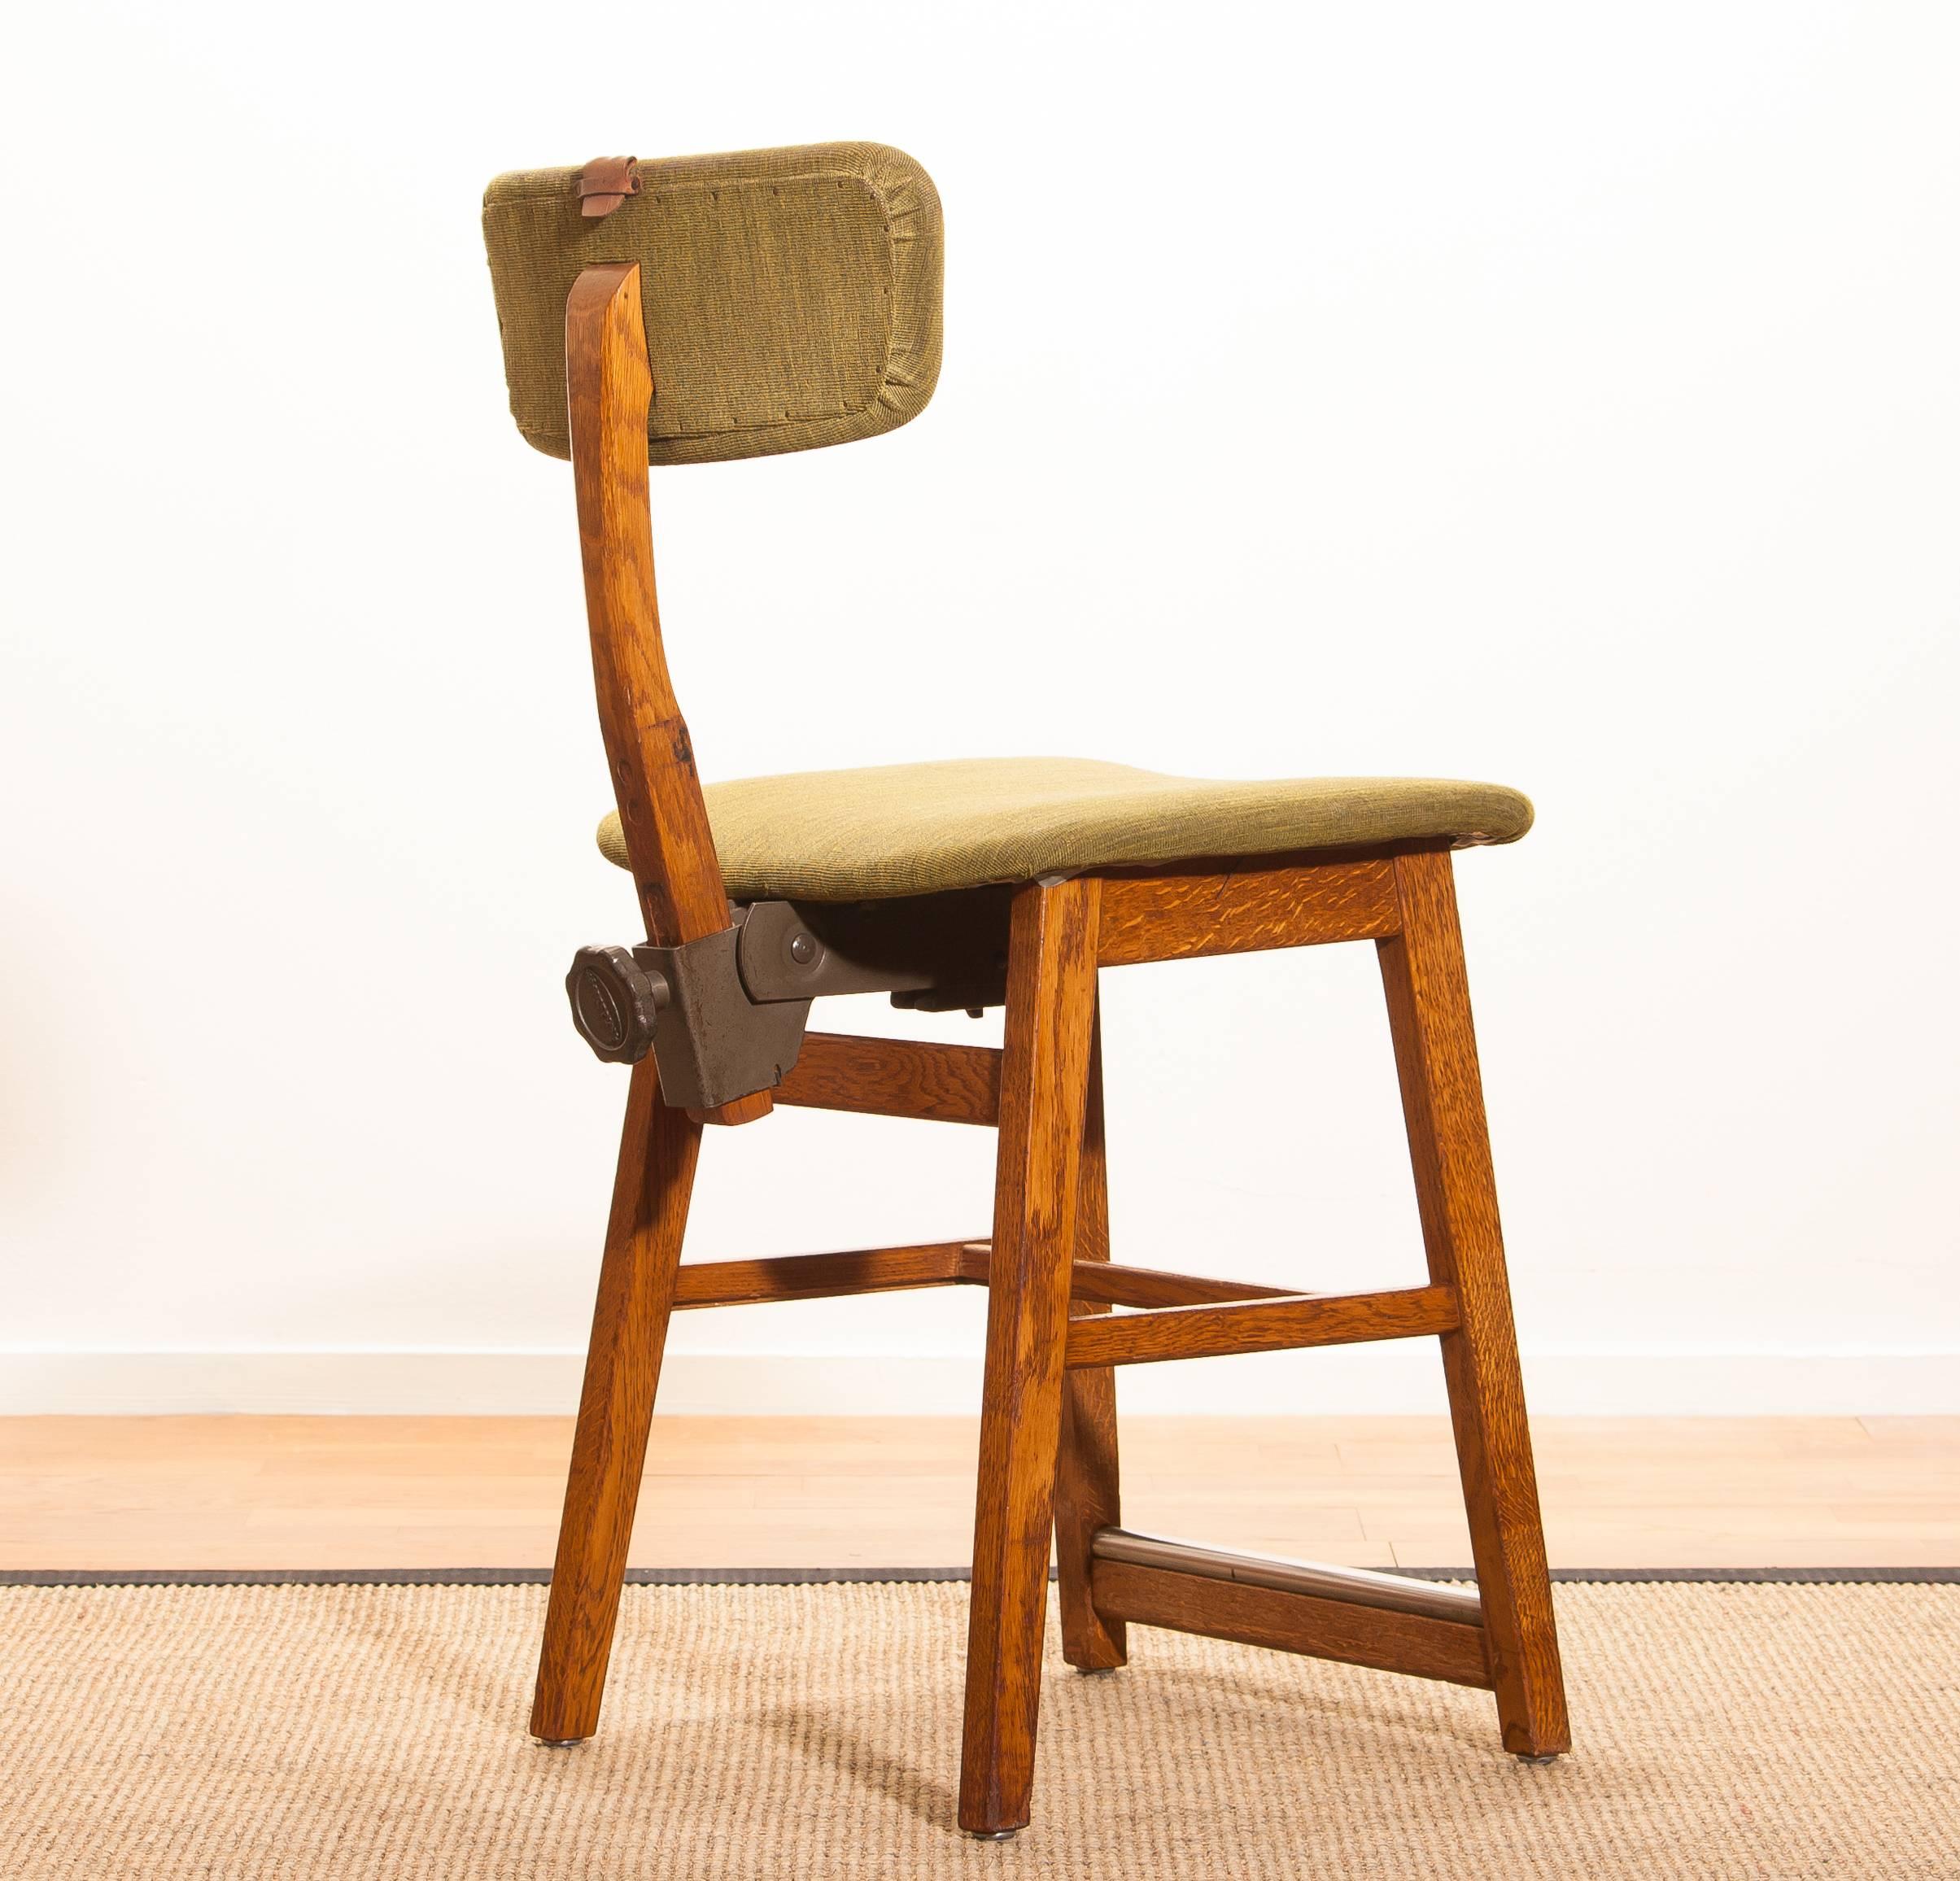 Swedish 1960s, Teak and Wool Desk Chair by Âtvidabergs Sweden